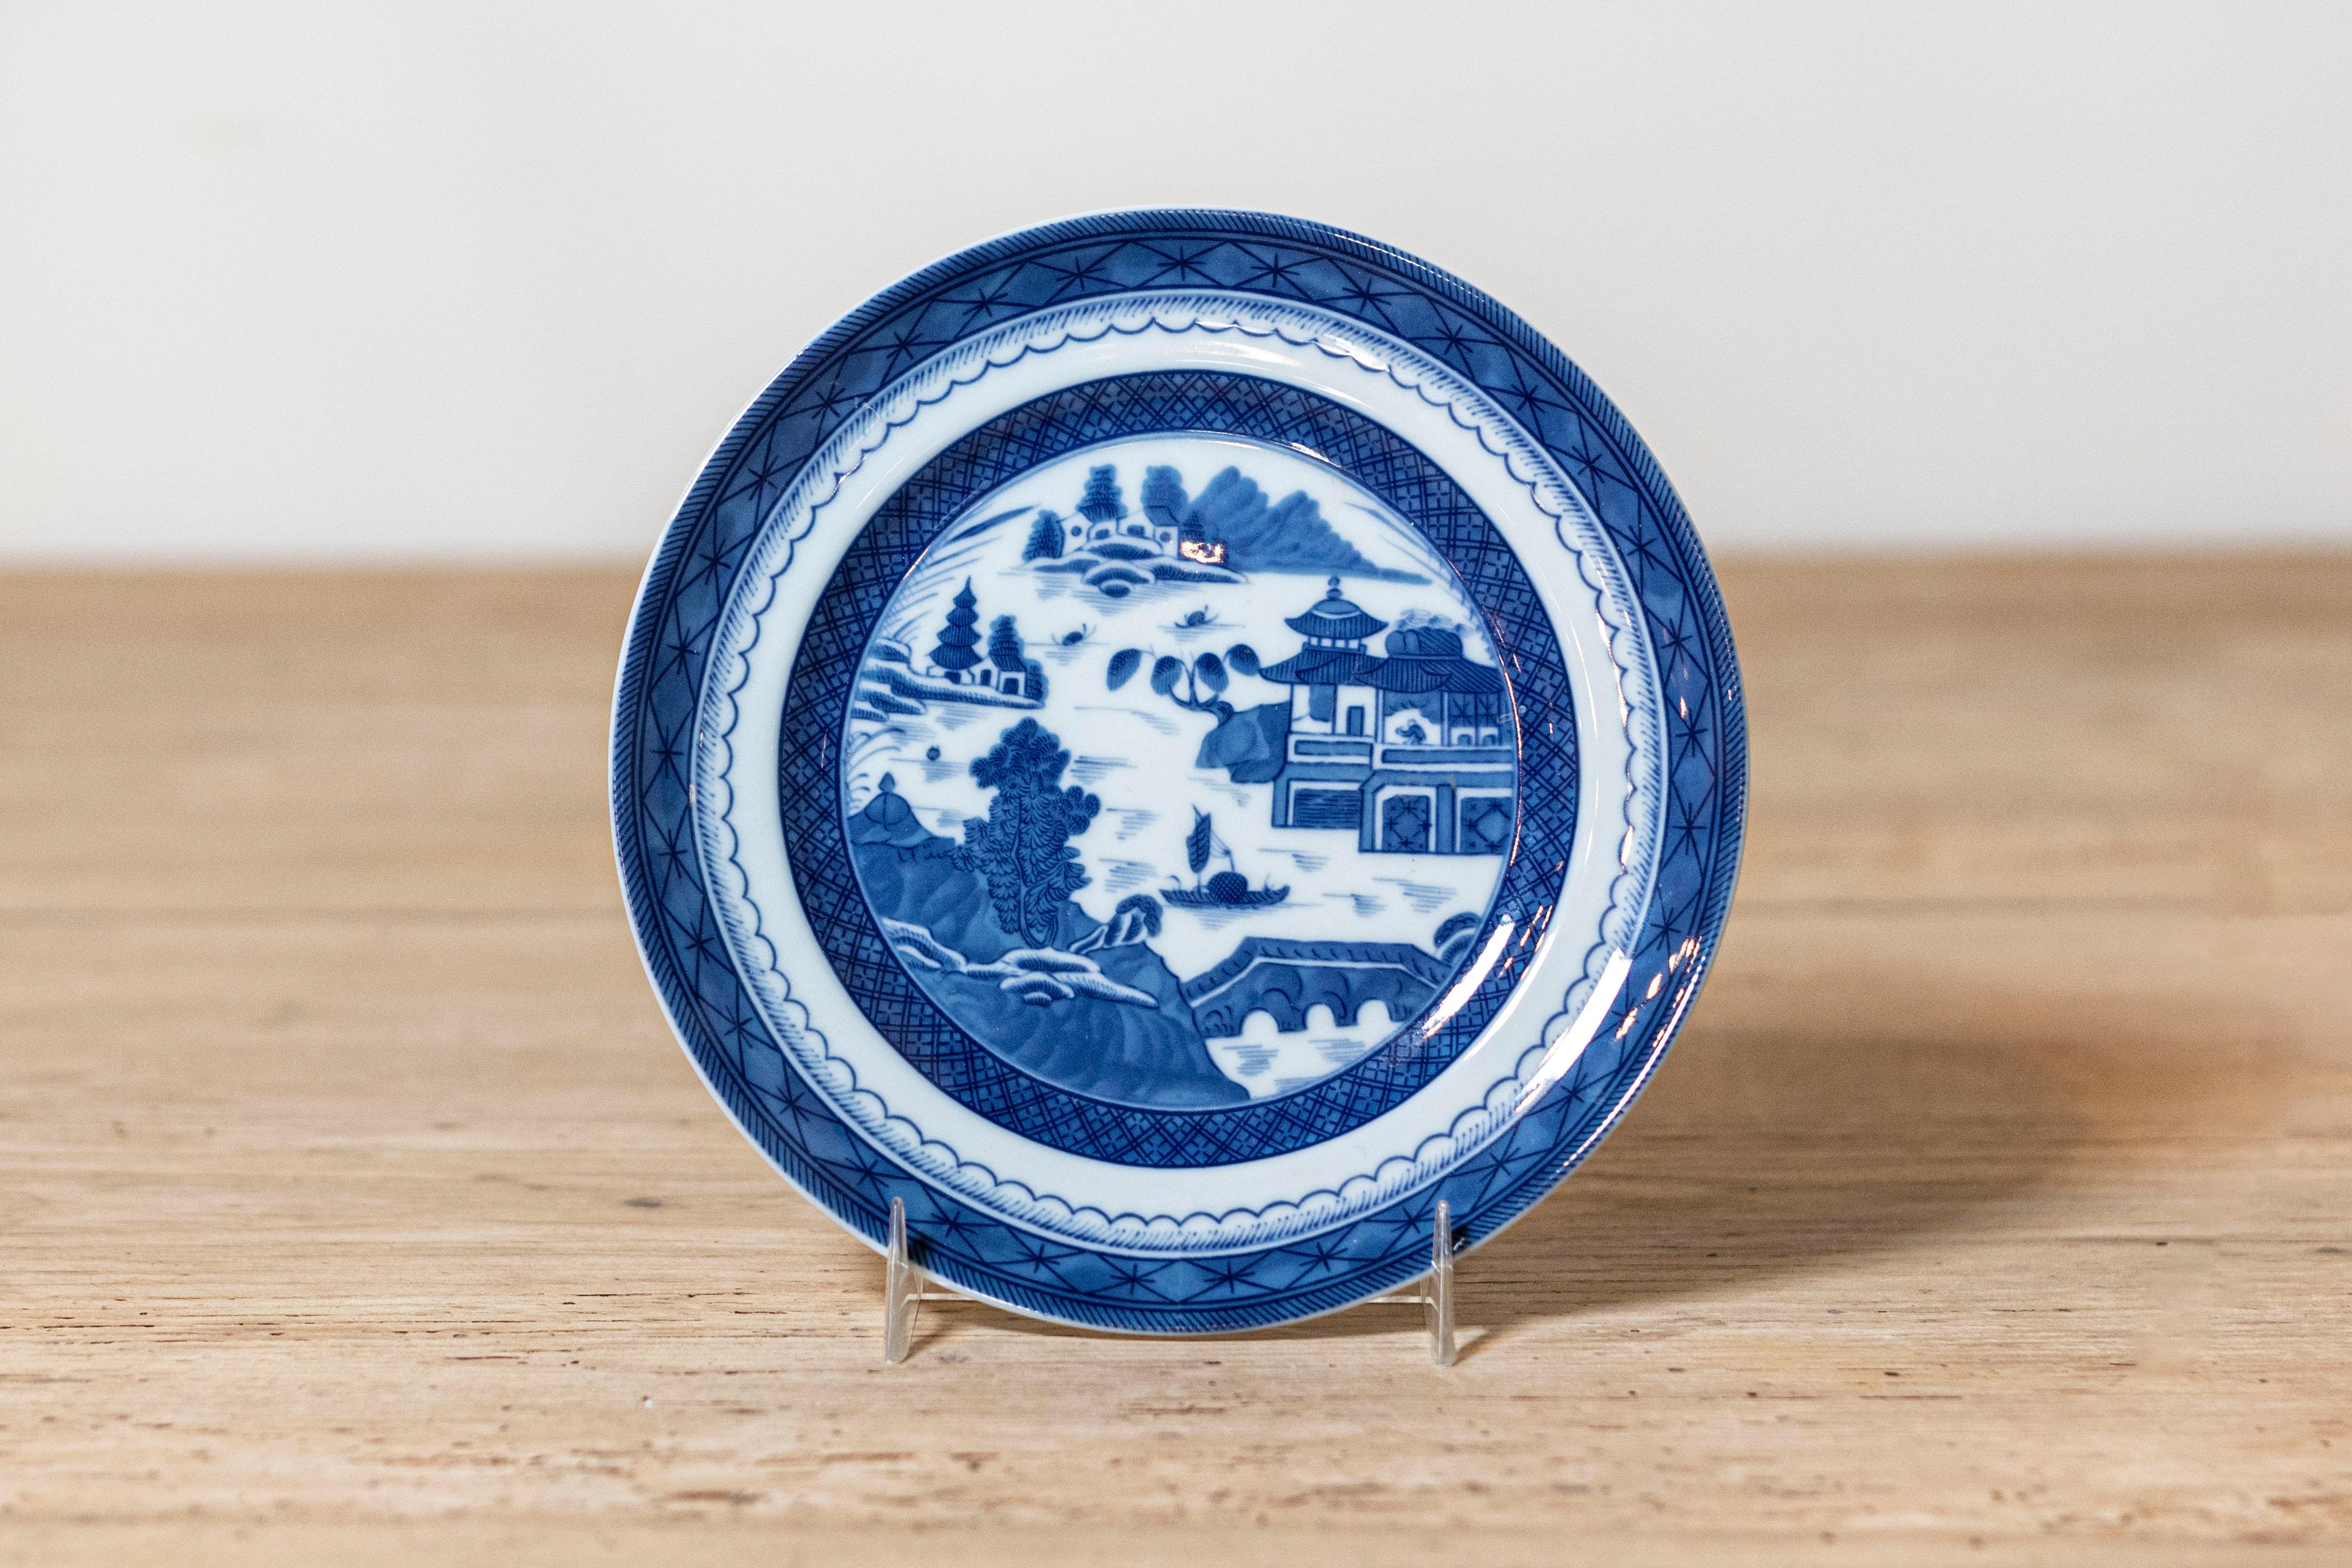 A Mottahedeh Blue Canton blue and white porcelain salad plate from the 20th century with pagoda and geometric accents. Created in Portugal by Mottahedeh under license of the Historic Charleston Foundation to reproduce the design of the original